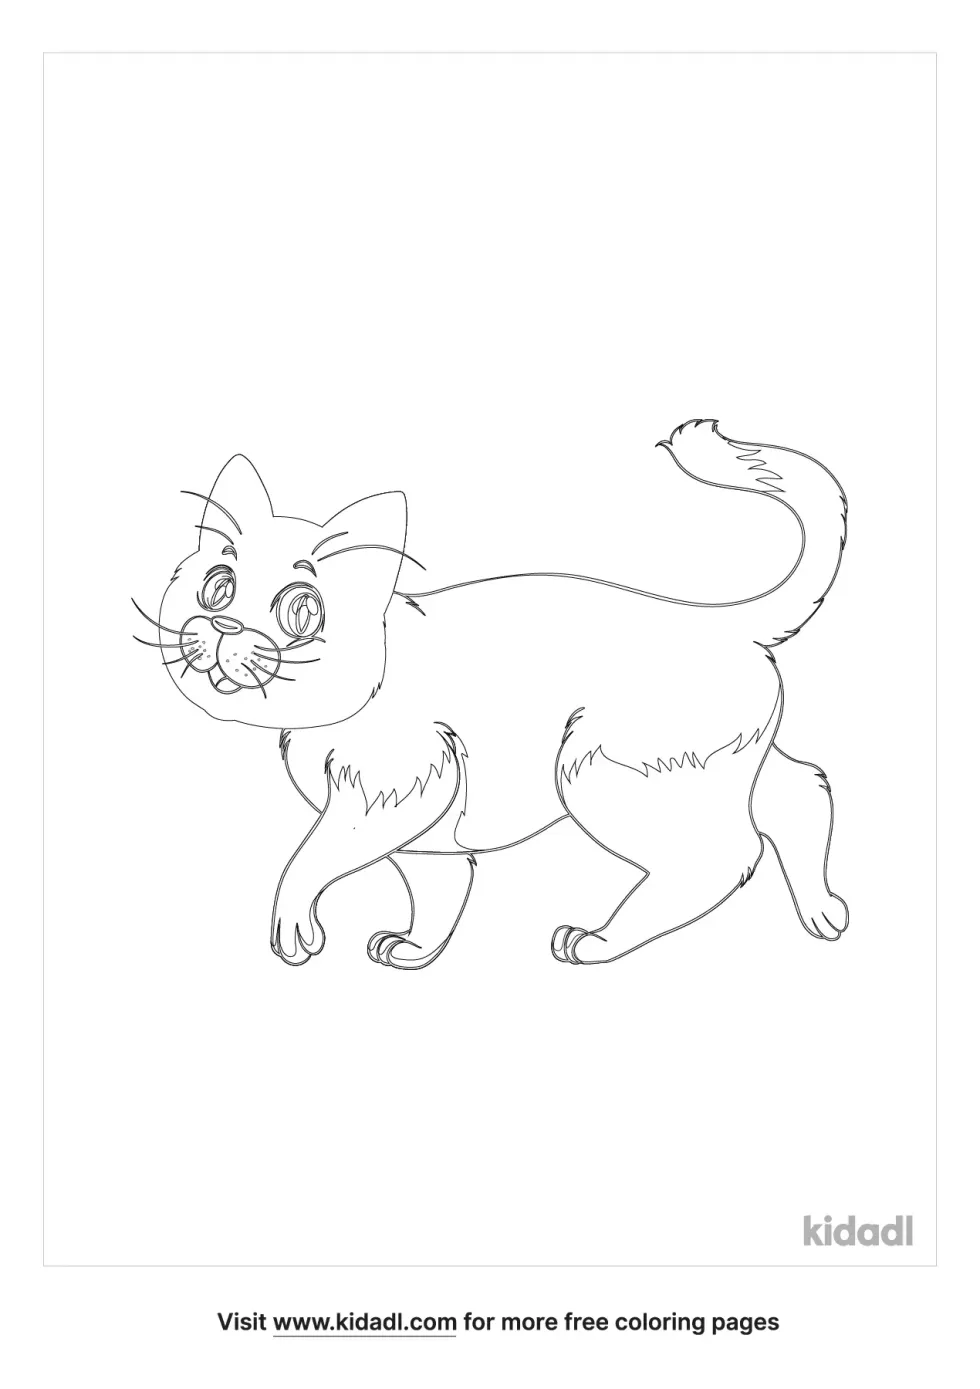 Fluffy Cat Coloring Page